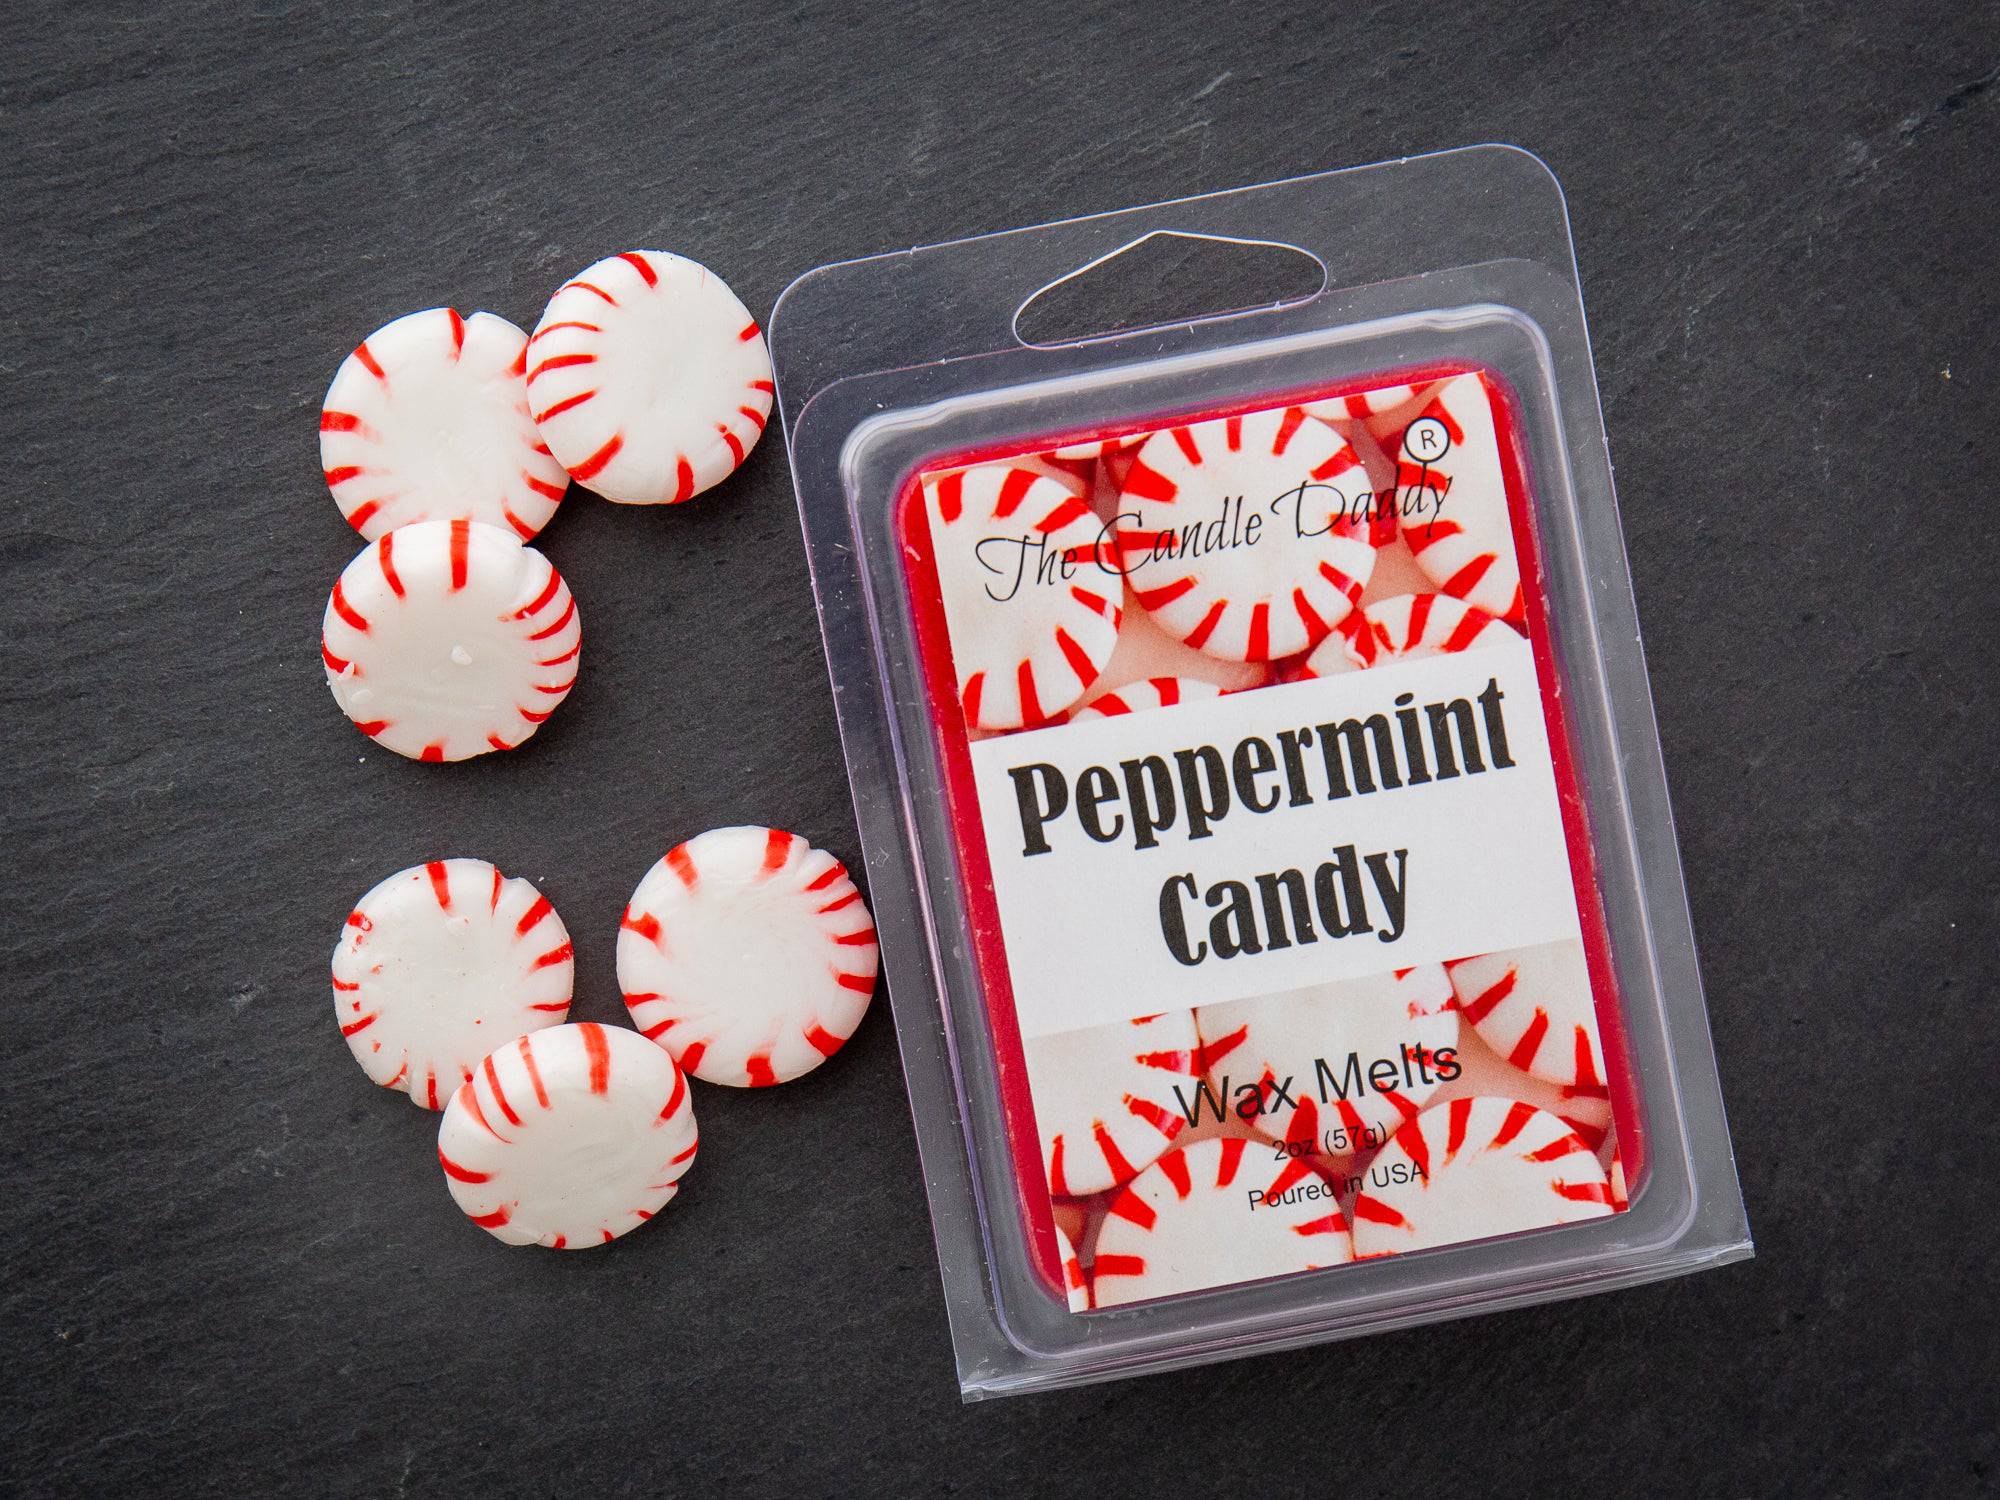 Fresh Peppermint Wax Melts - Formula 117 - 1 Highly Scented 3 oz. Bar - Made with Natural Oils - Christmas & Holiday Air Freshener Cubes Collection